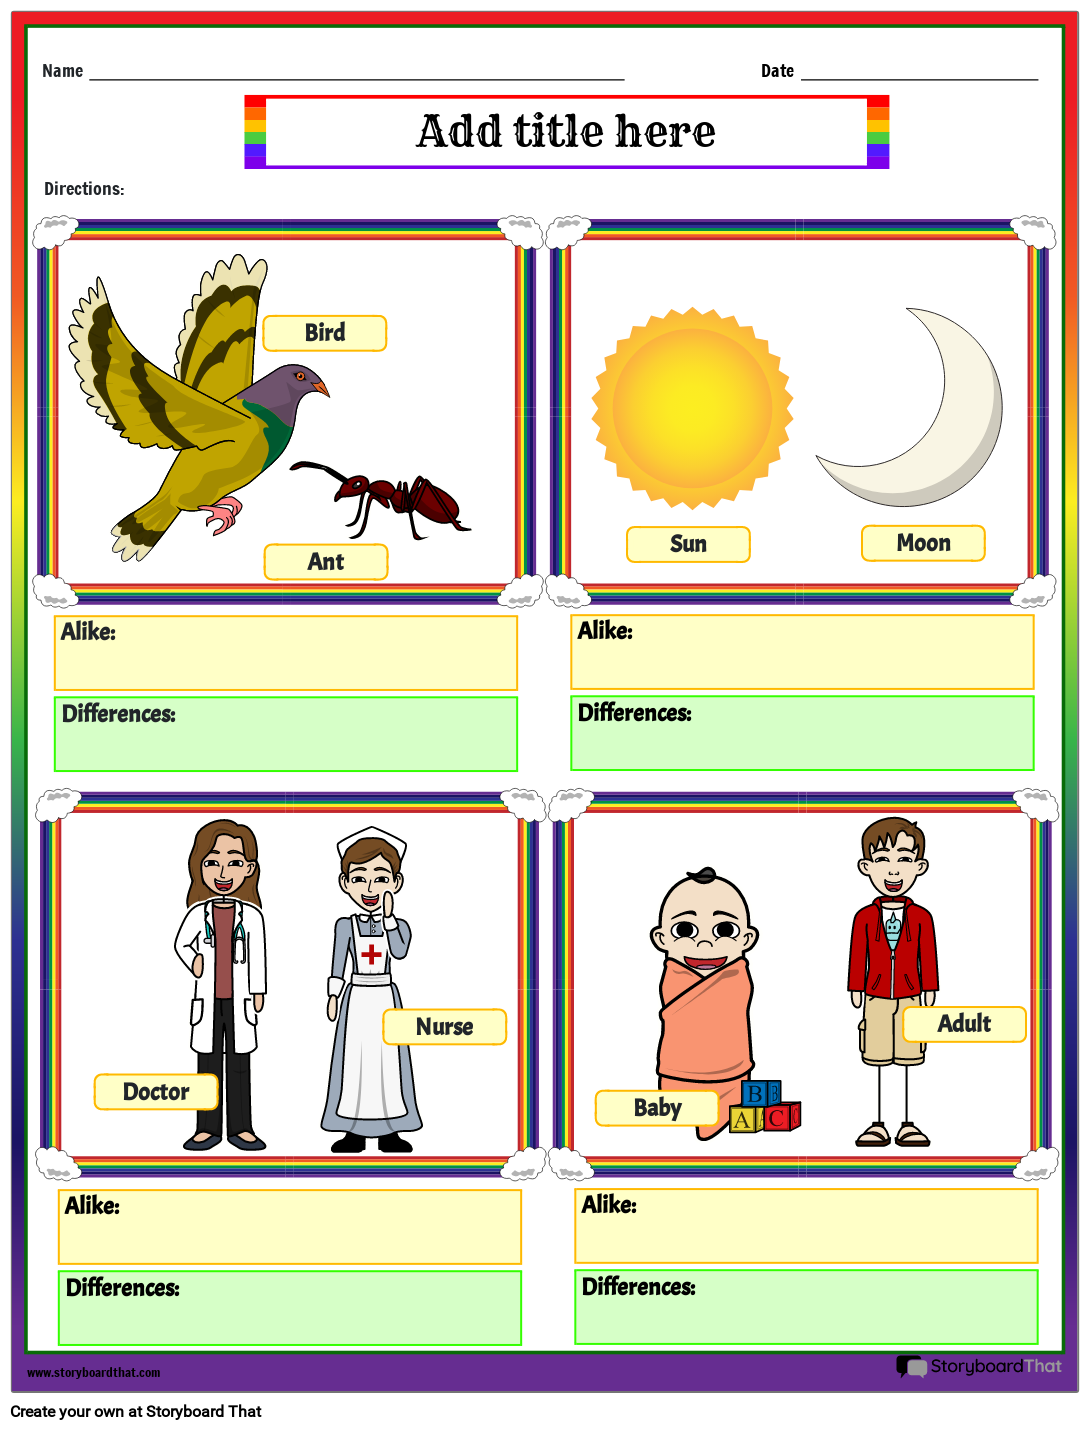 Alike and Differences Worksheet